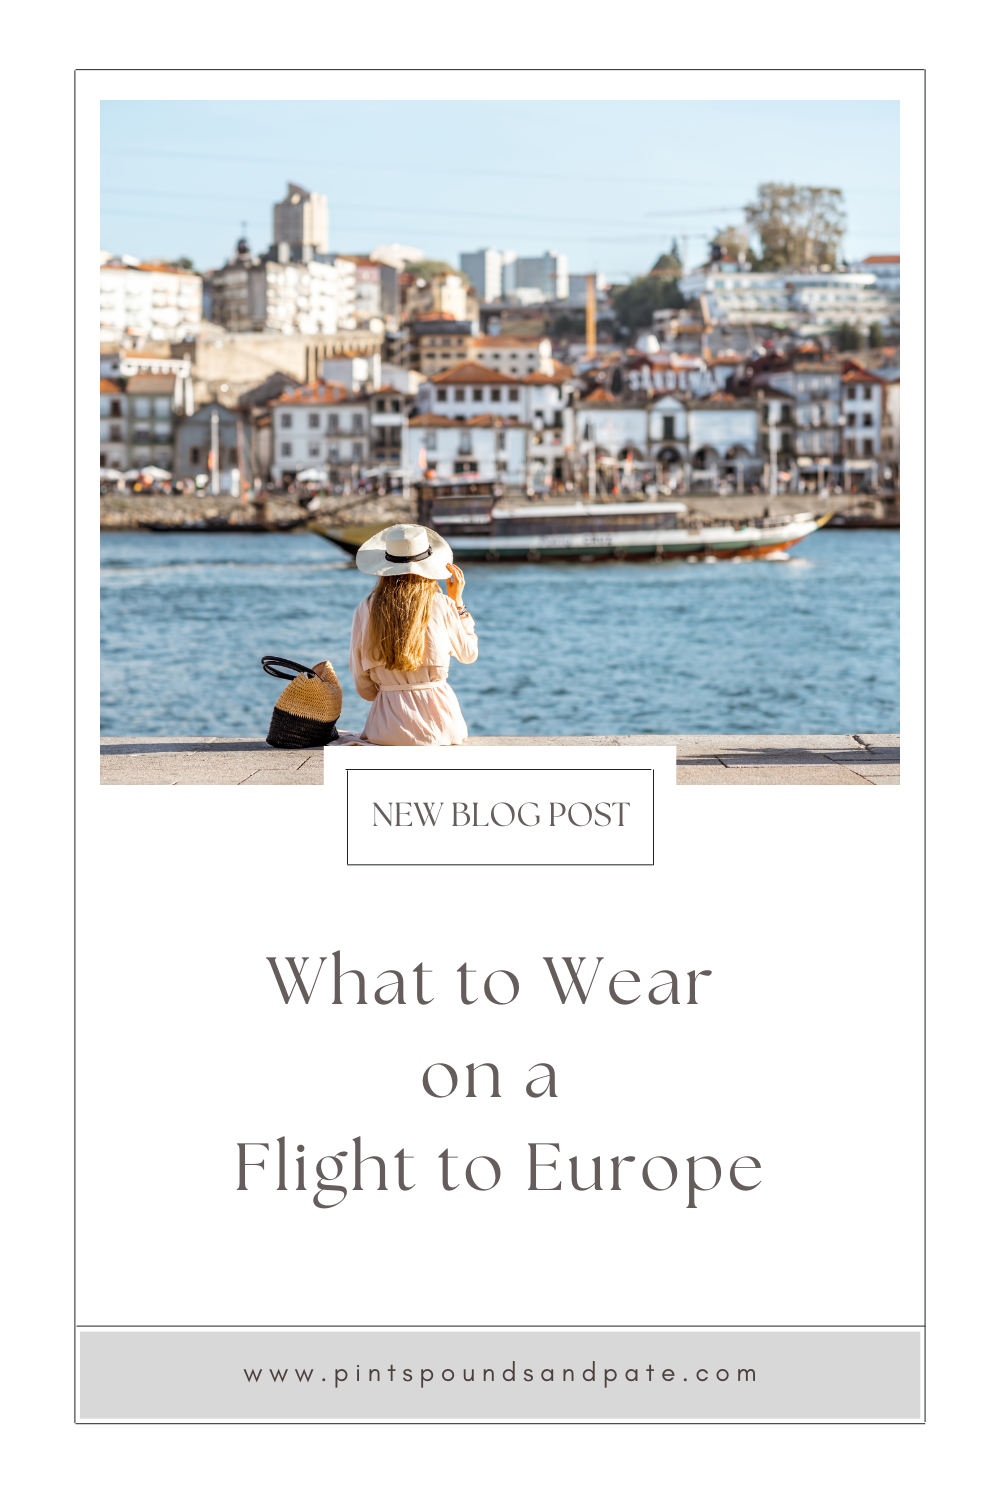 What to Wear on a Flight to Europe